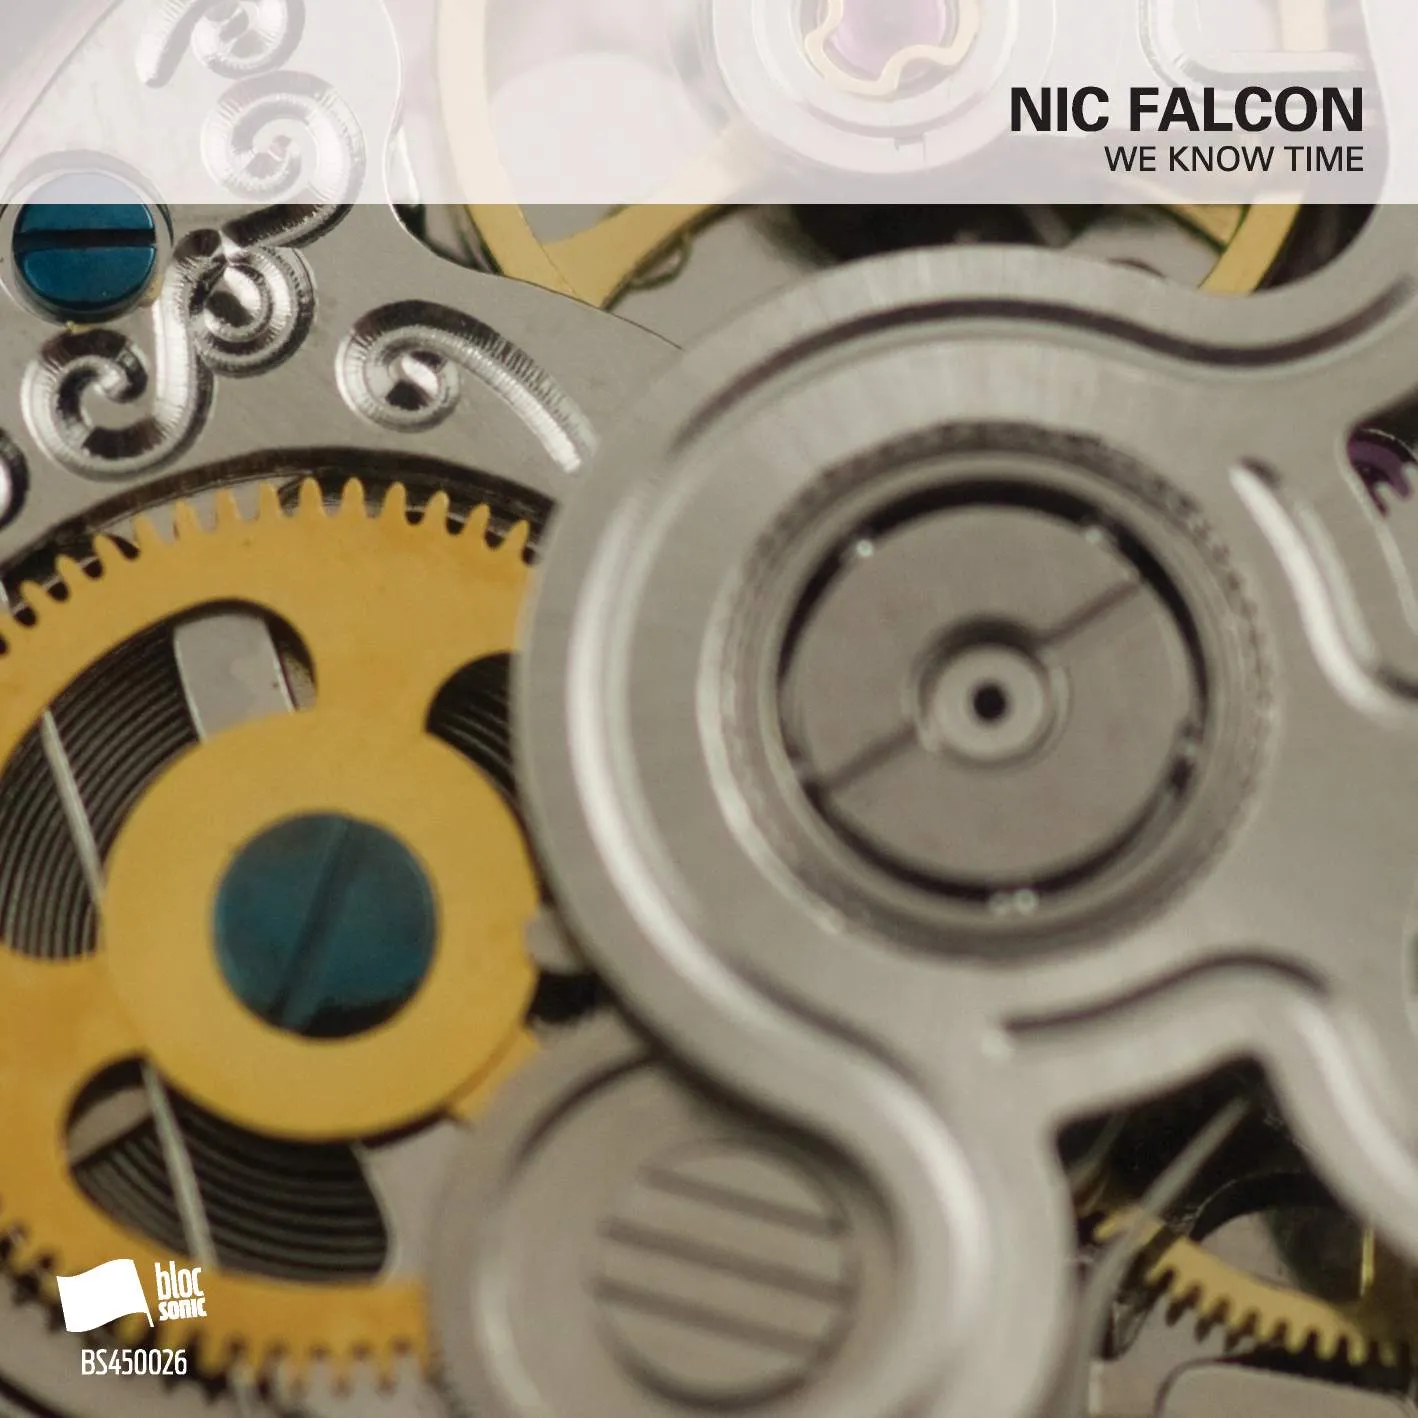 Album cover for “We Know Time” by Nick Falcon